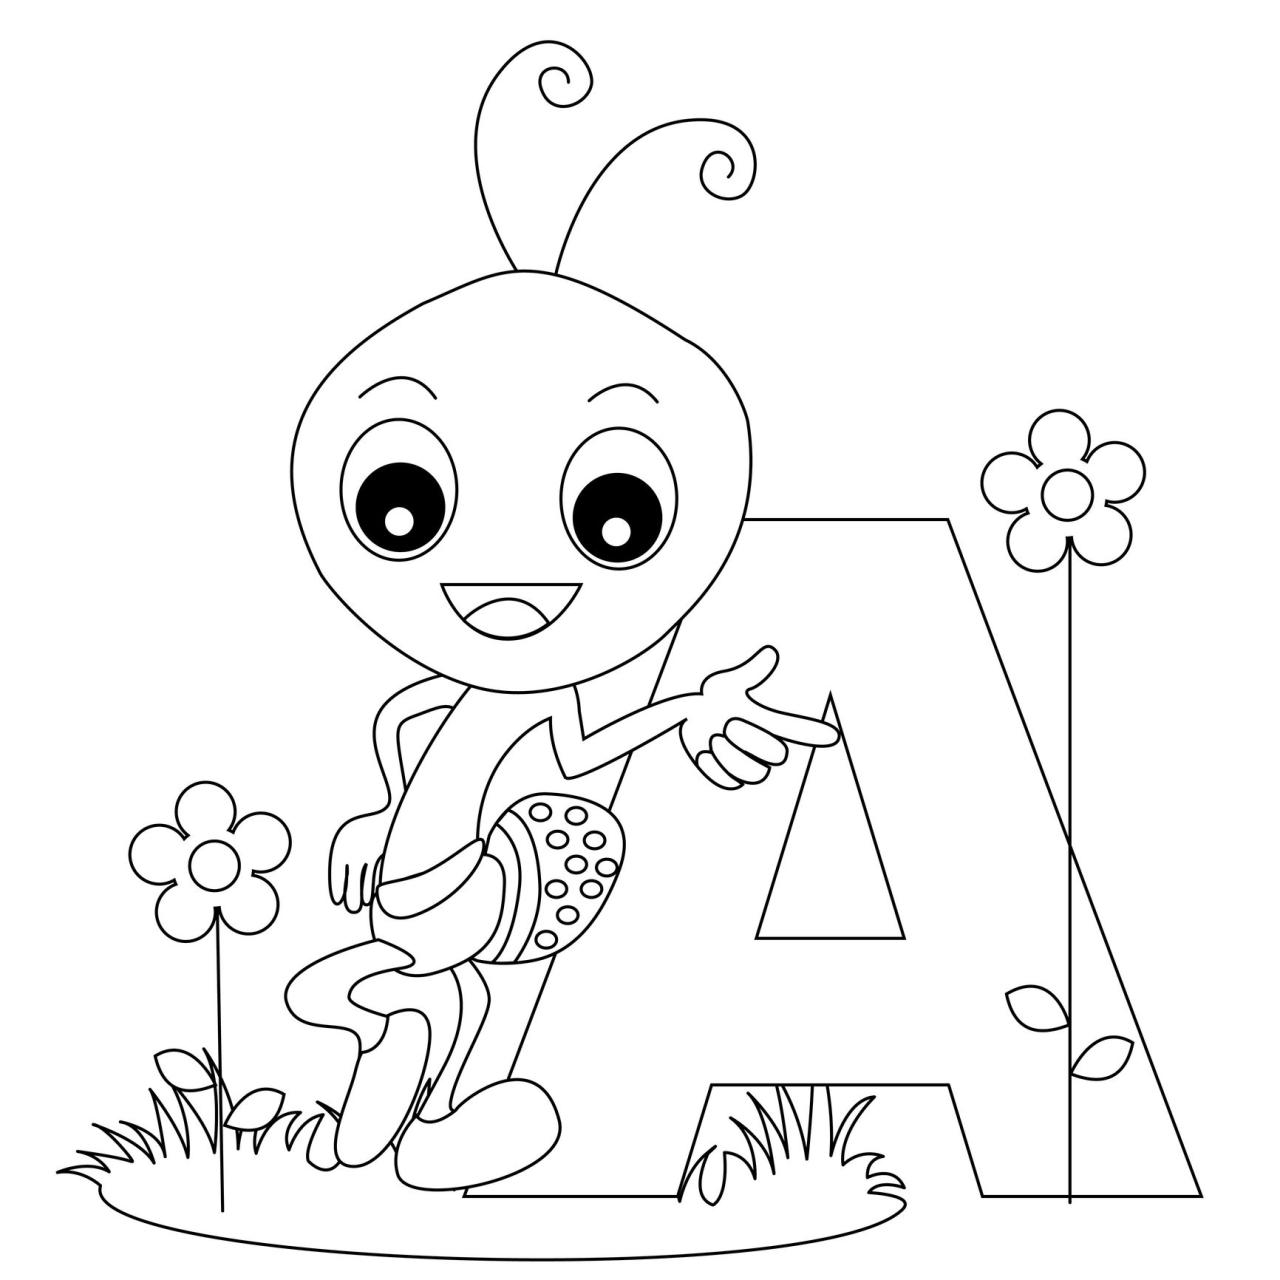 Coloring Pages For Kids Alphabet Letters